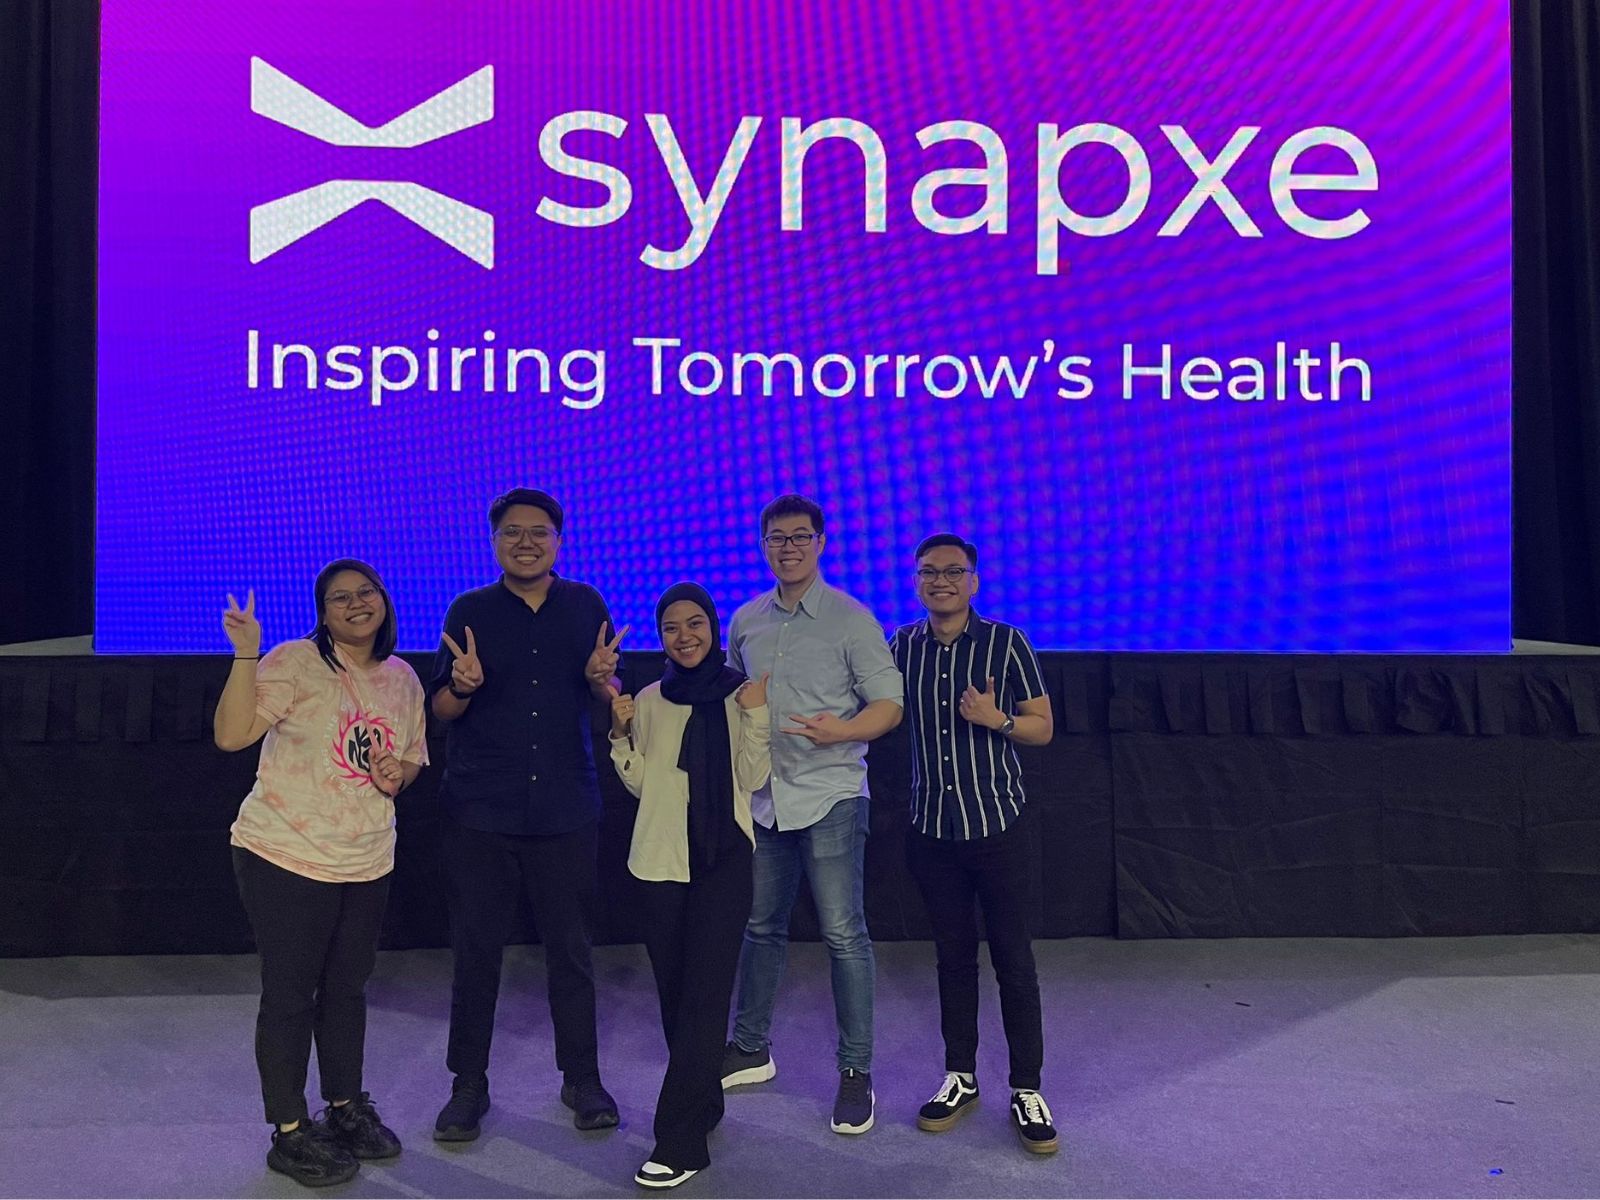 Abdul Aziz poses with 4 other people in front of a Synapxe logo.